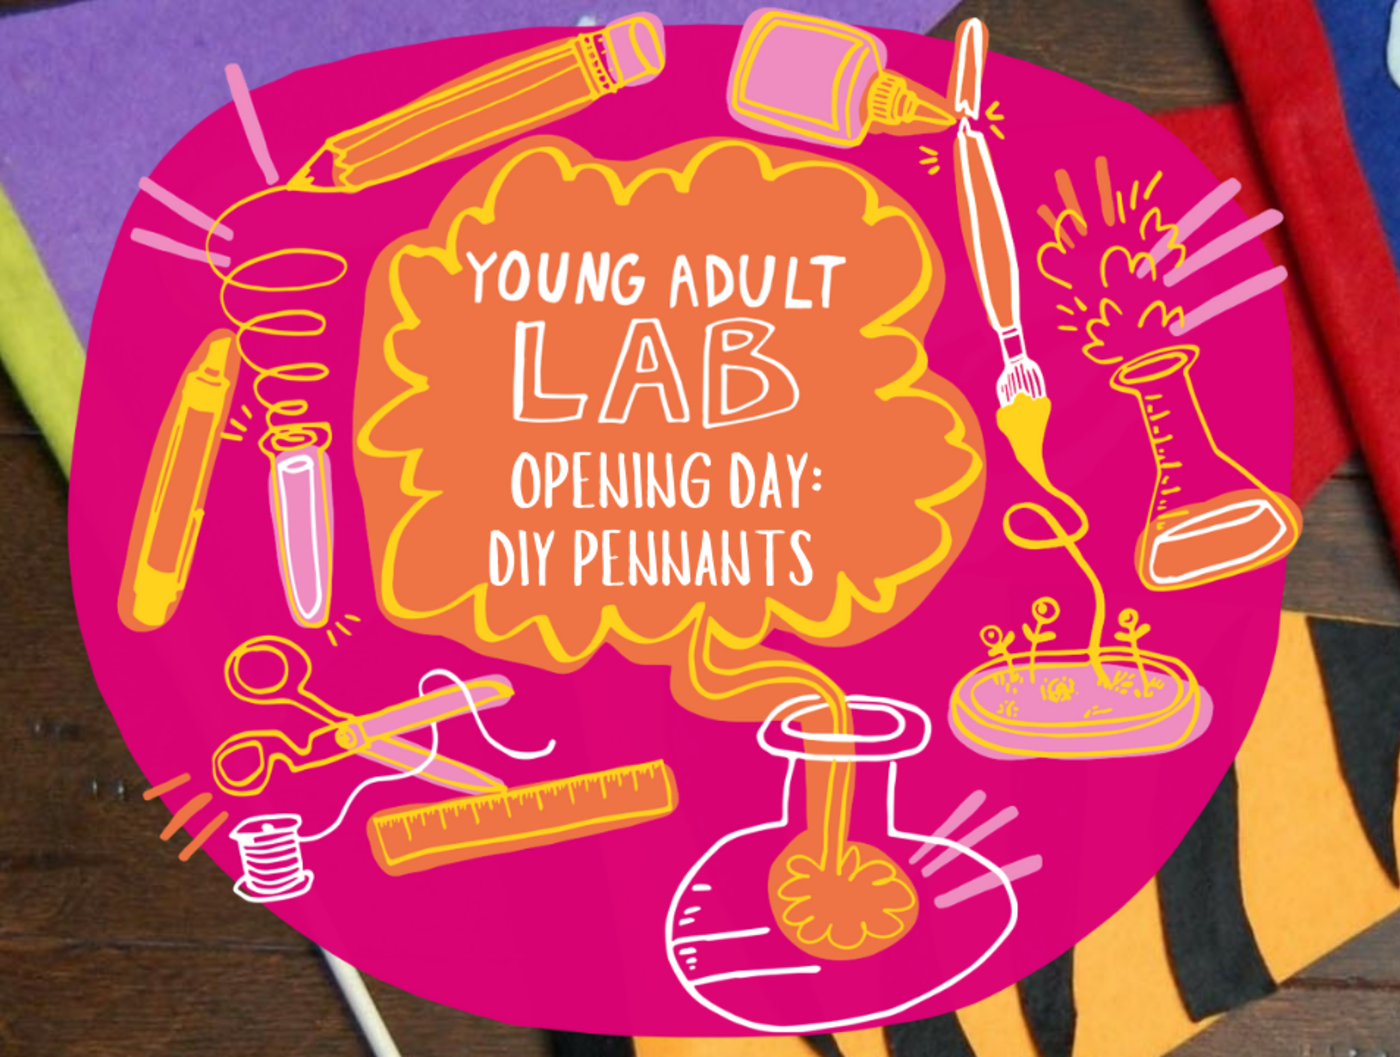 Young Adult Lab: Opening Day DIY Pennants!